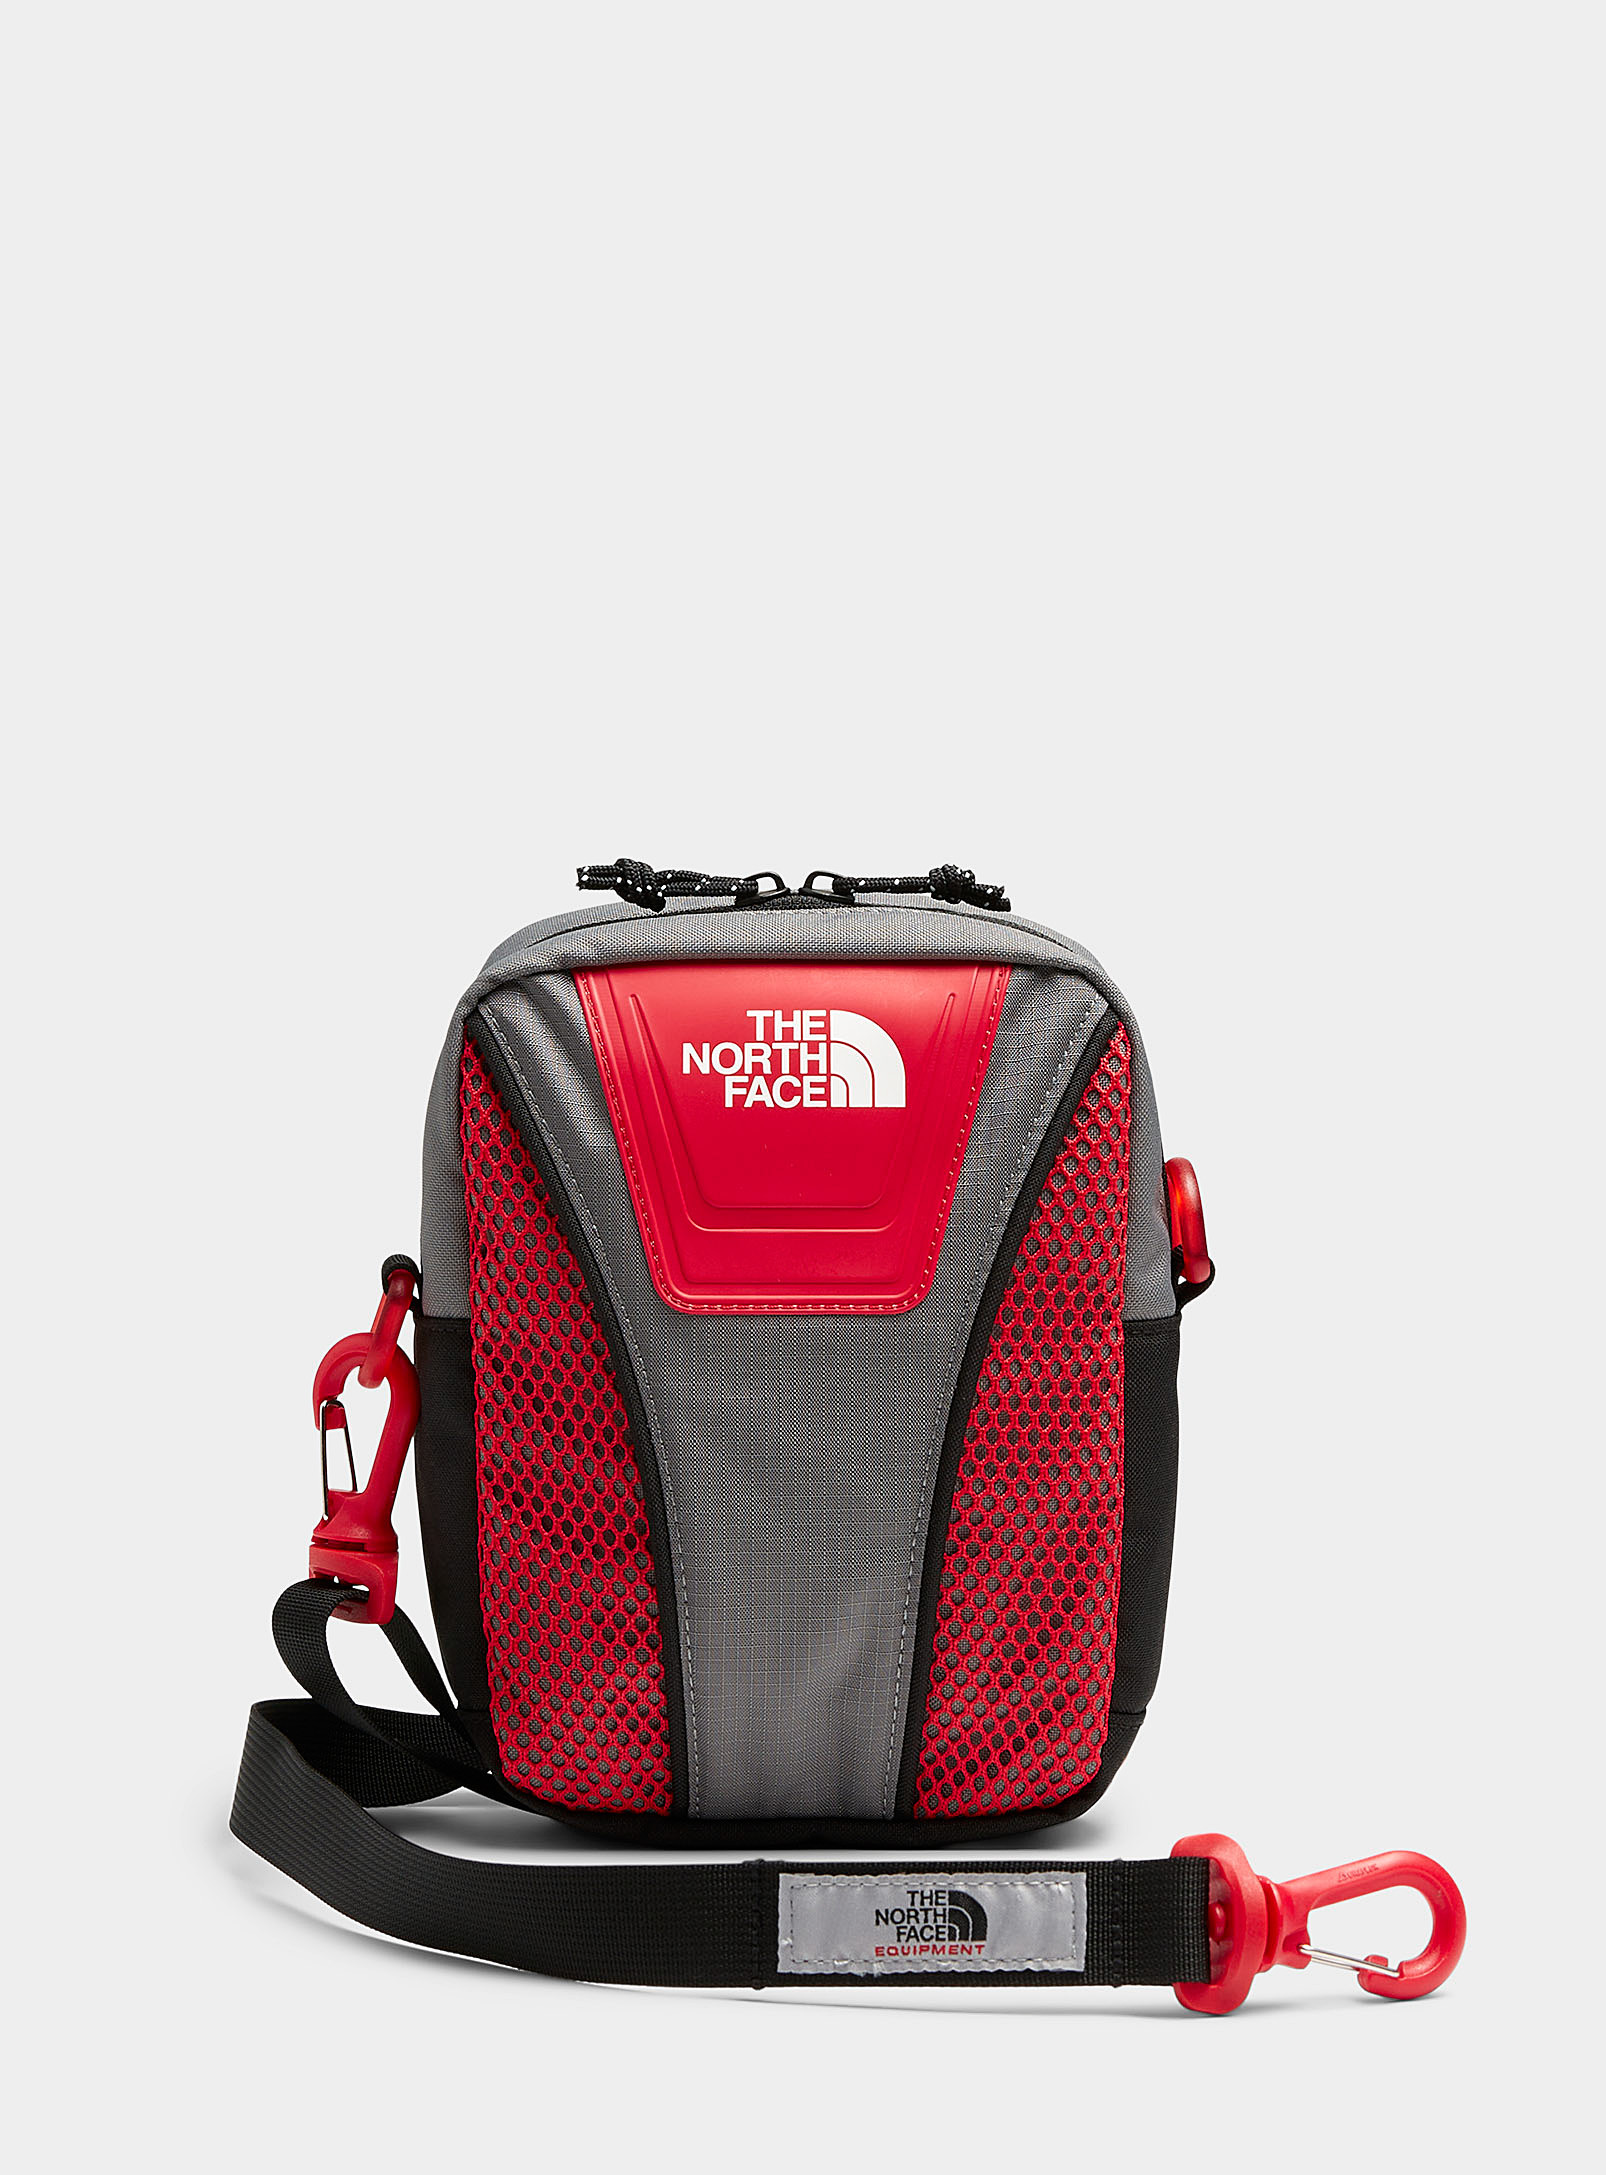 The North Face Racing Shoulder Bag In Red